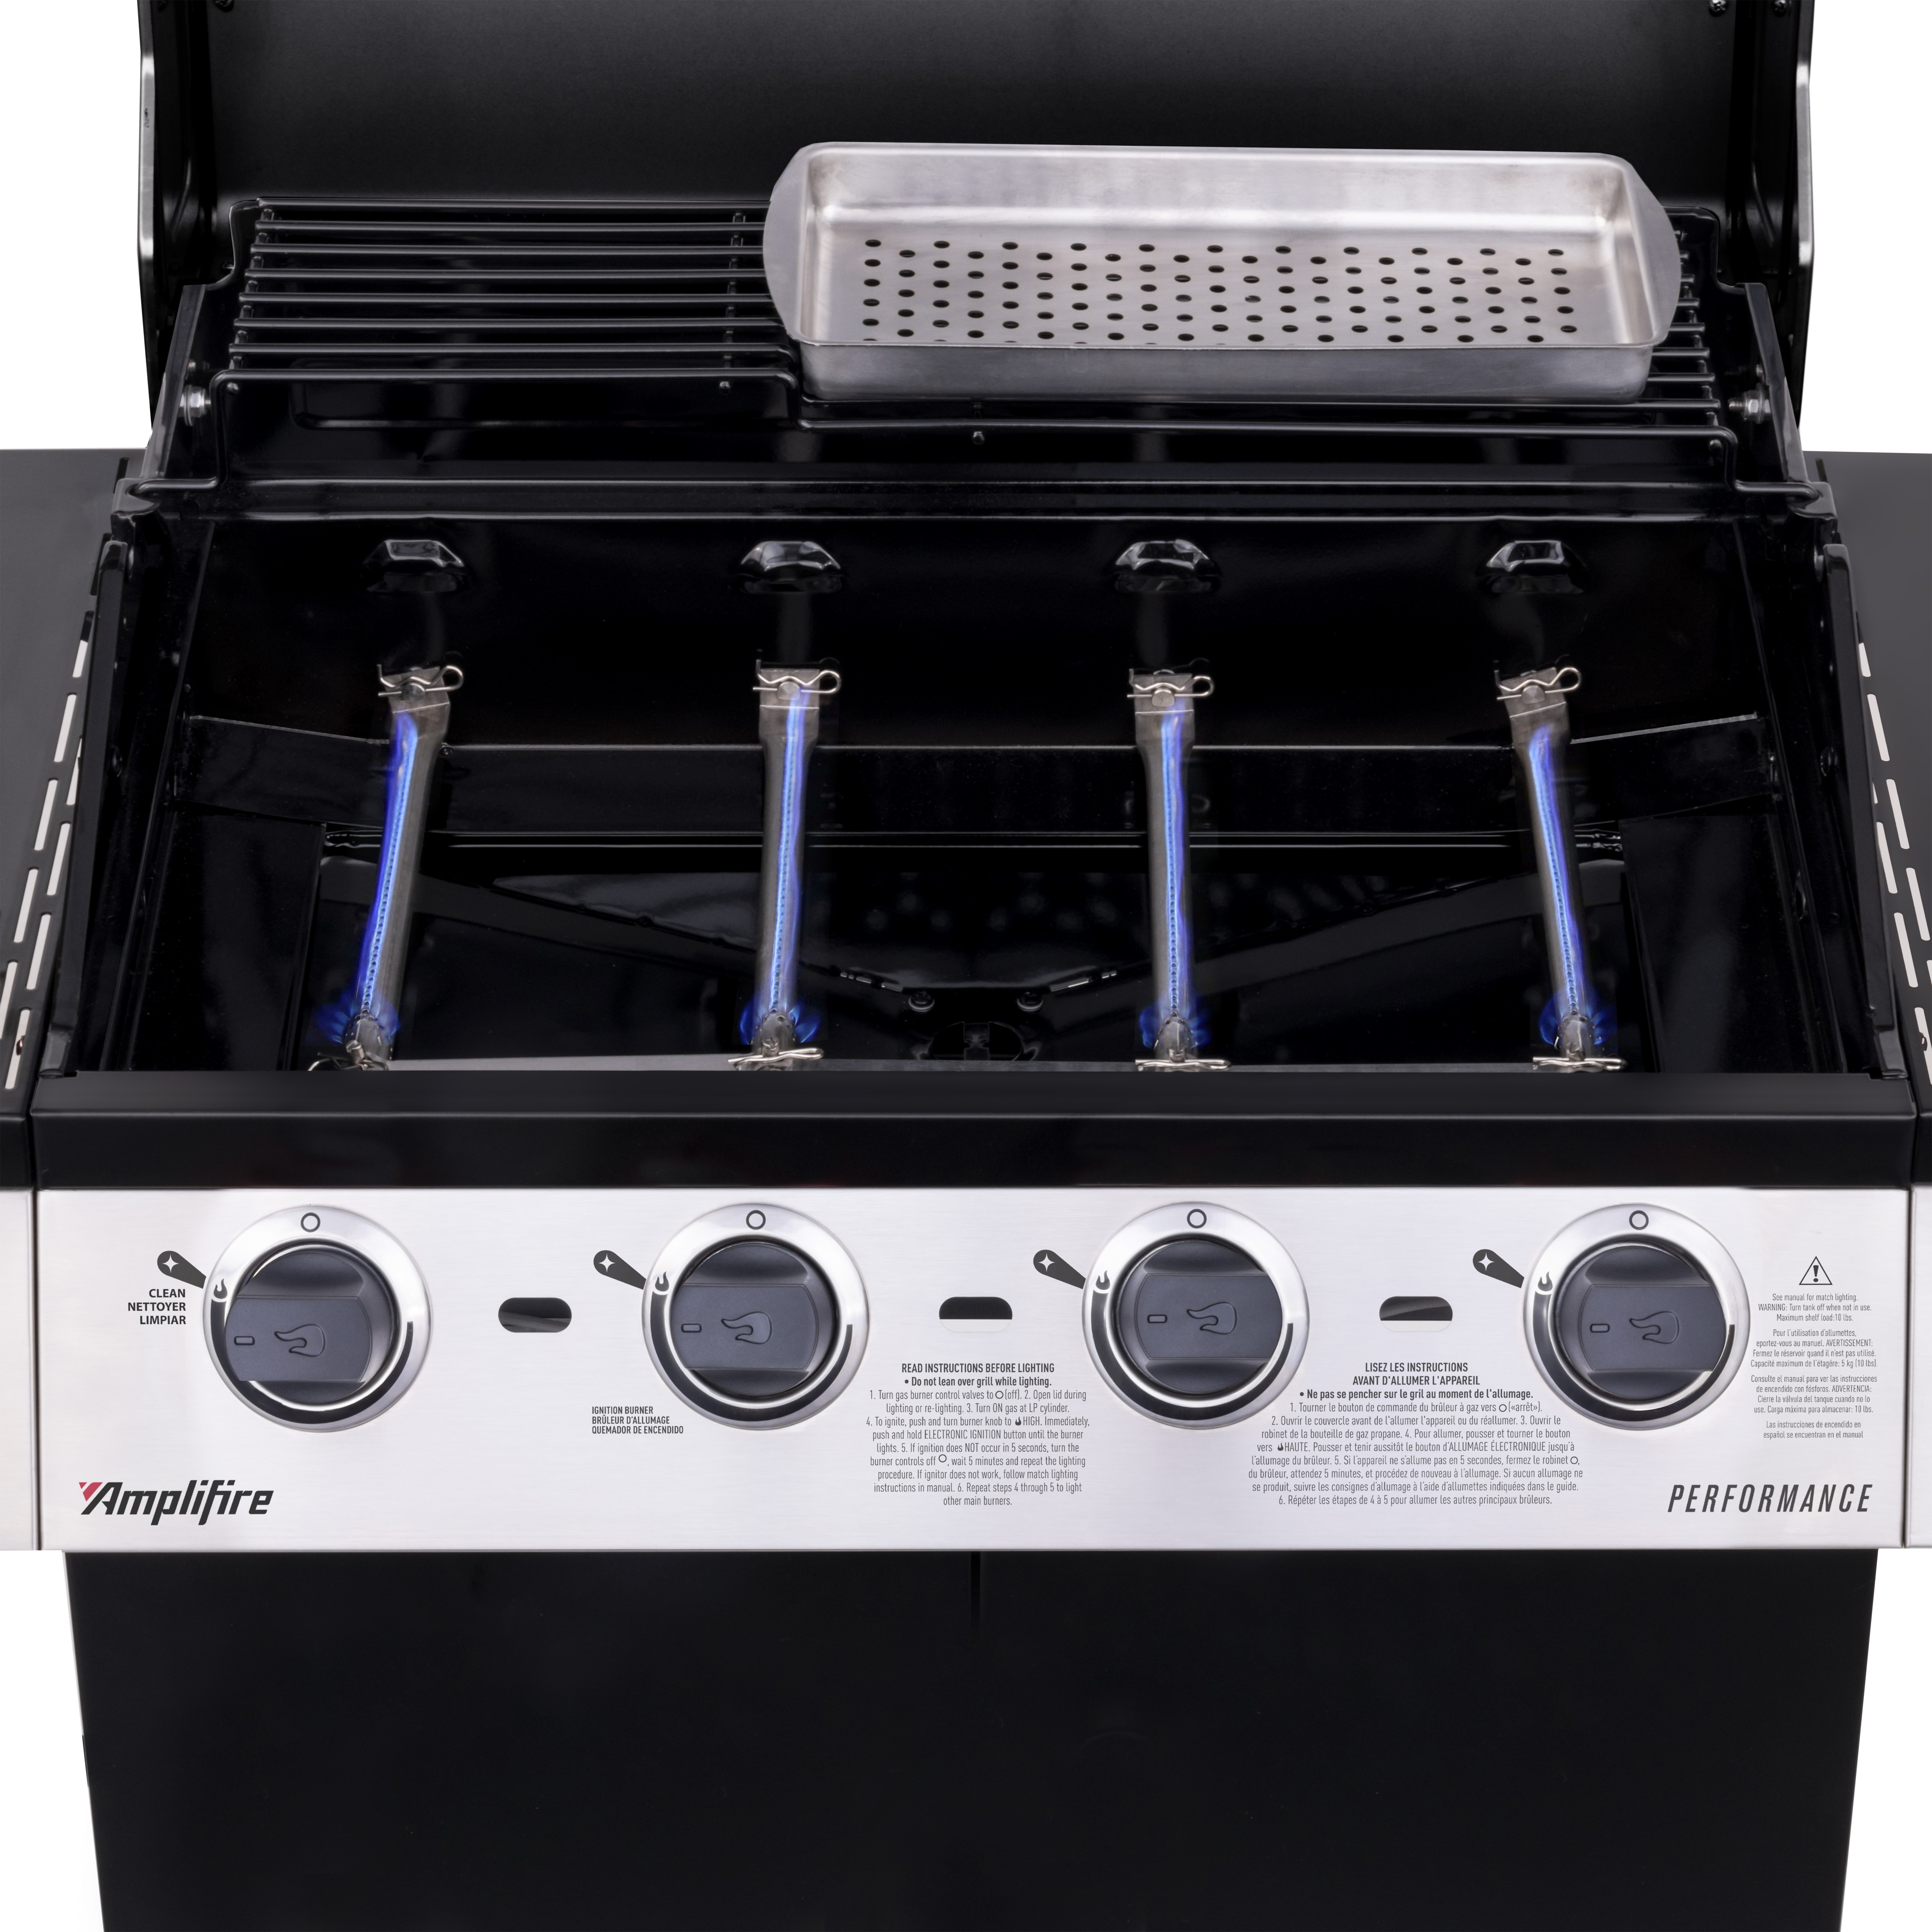 Char-Broil® Performance Series™ Amplifire 4-Burner Gas Grill - image 3 of 5